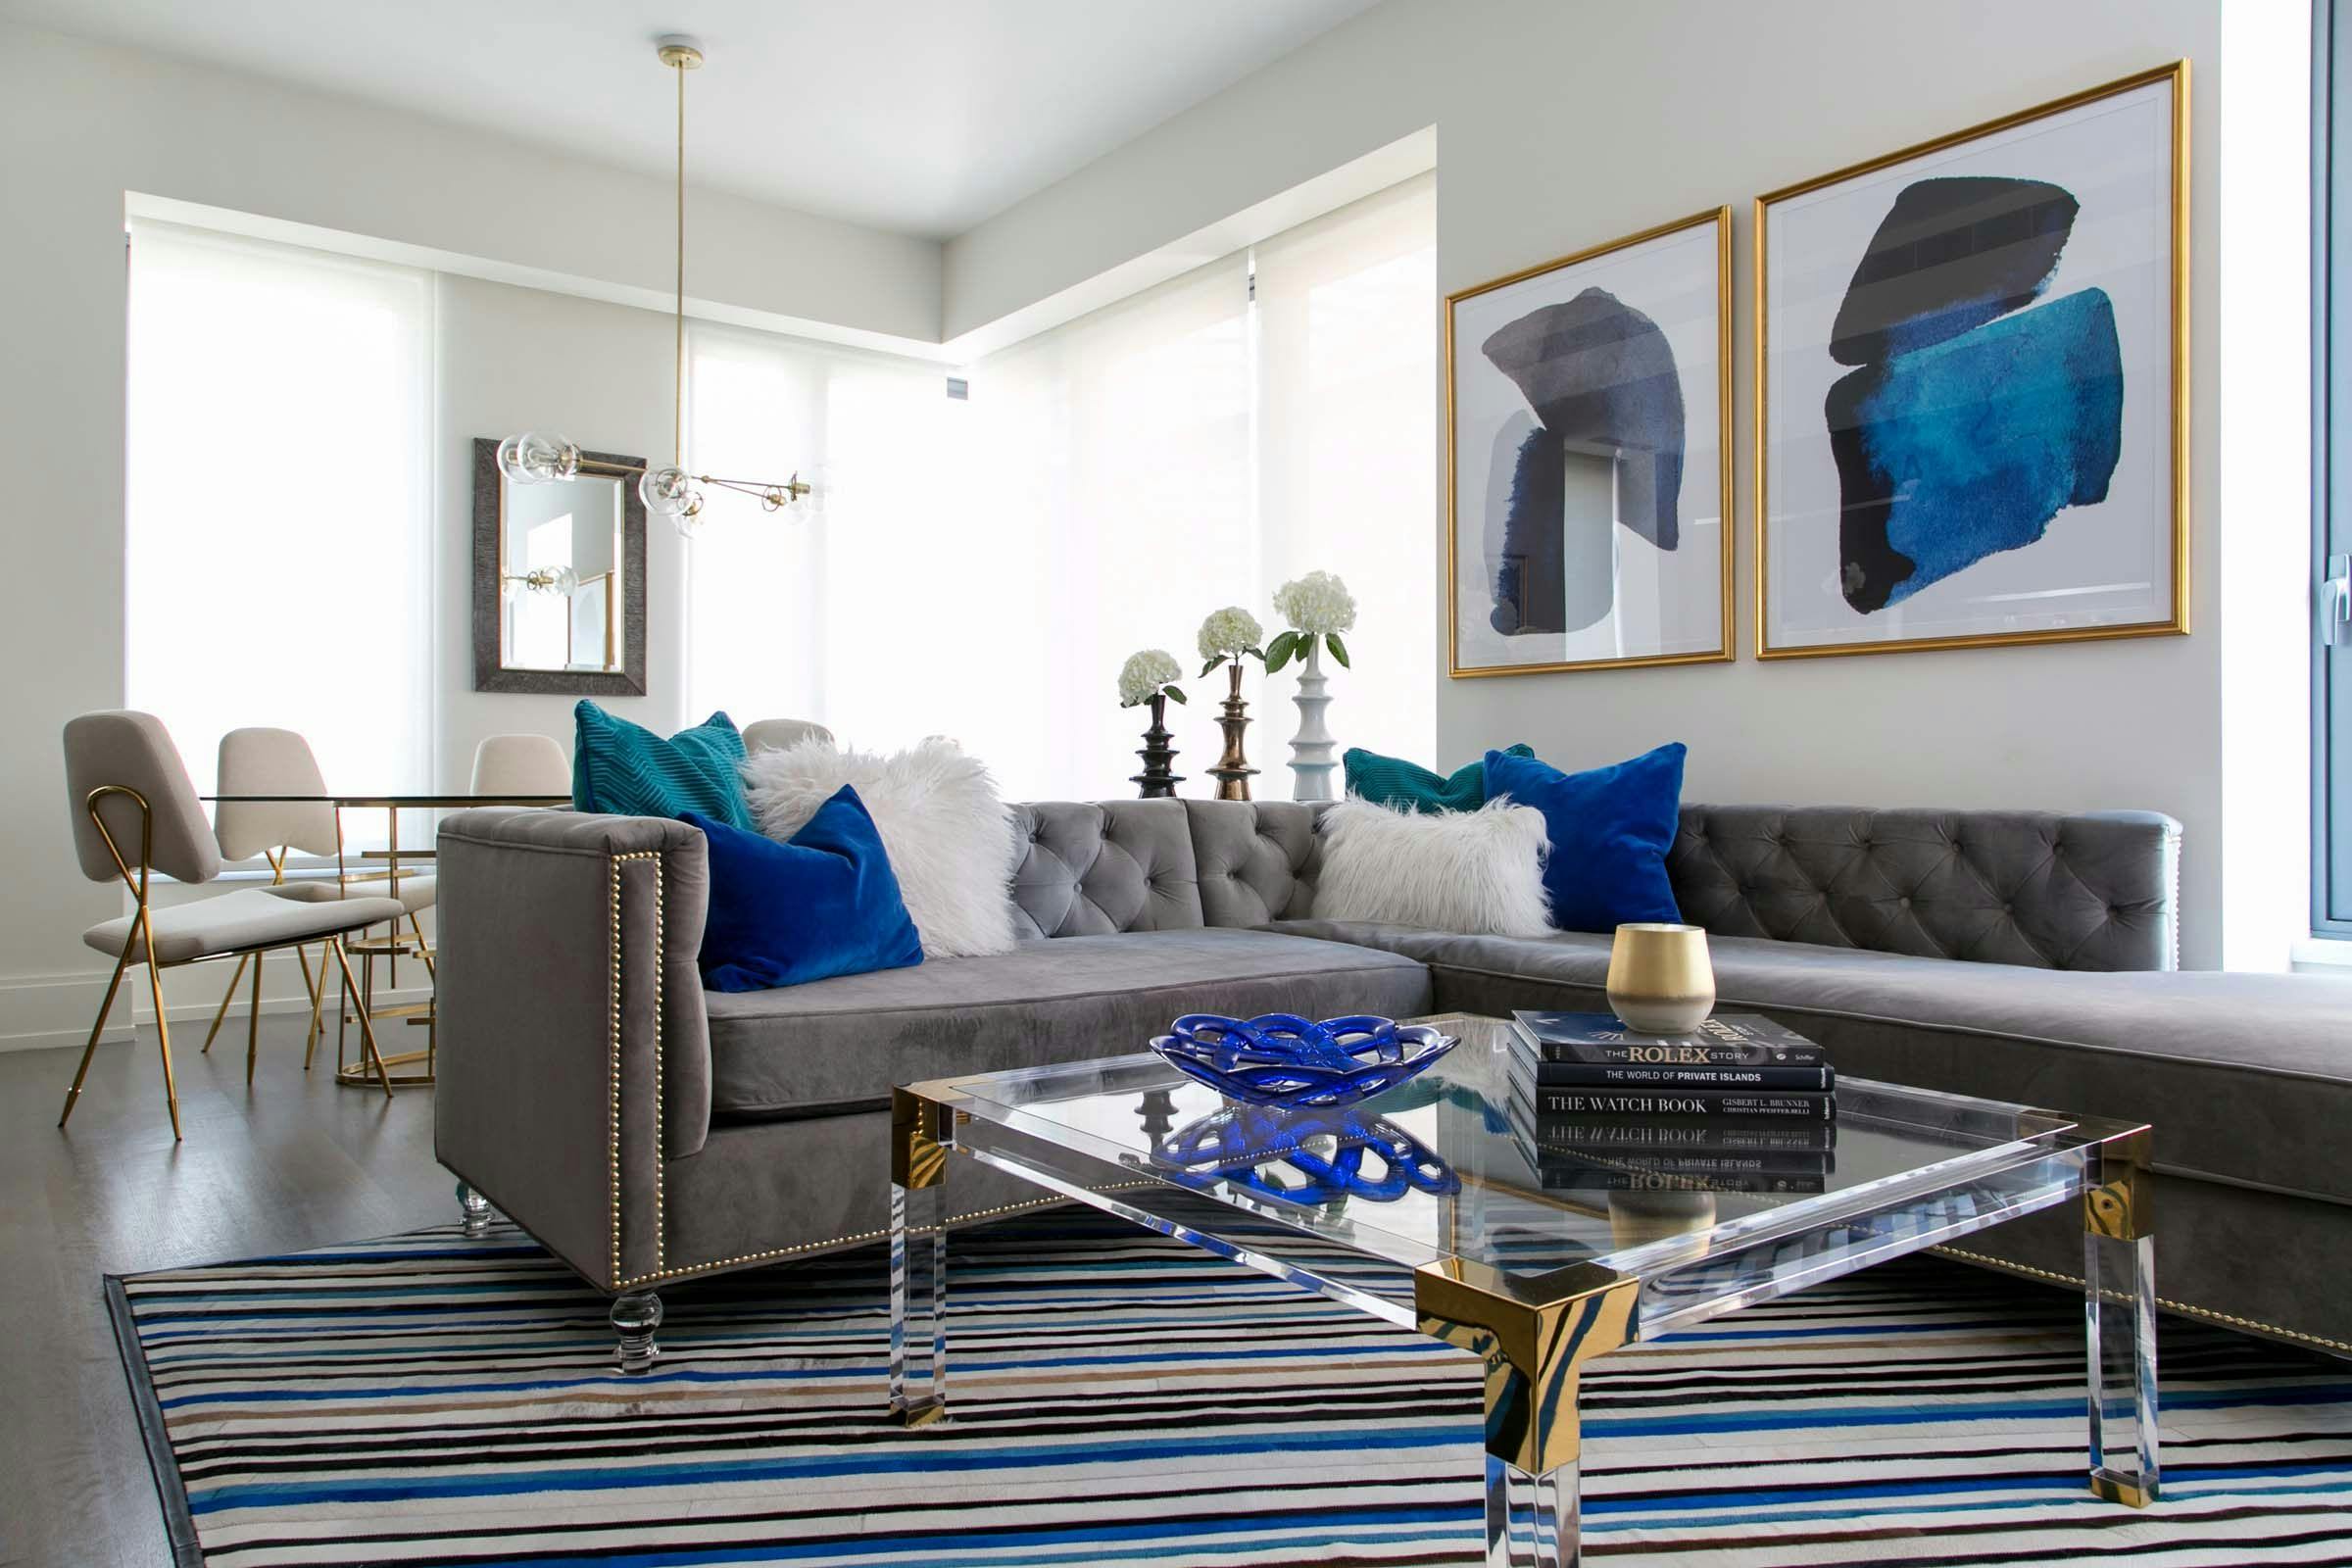 50th ST living room with blue accents